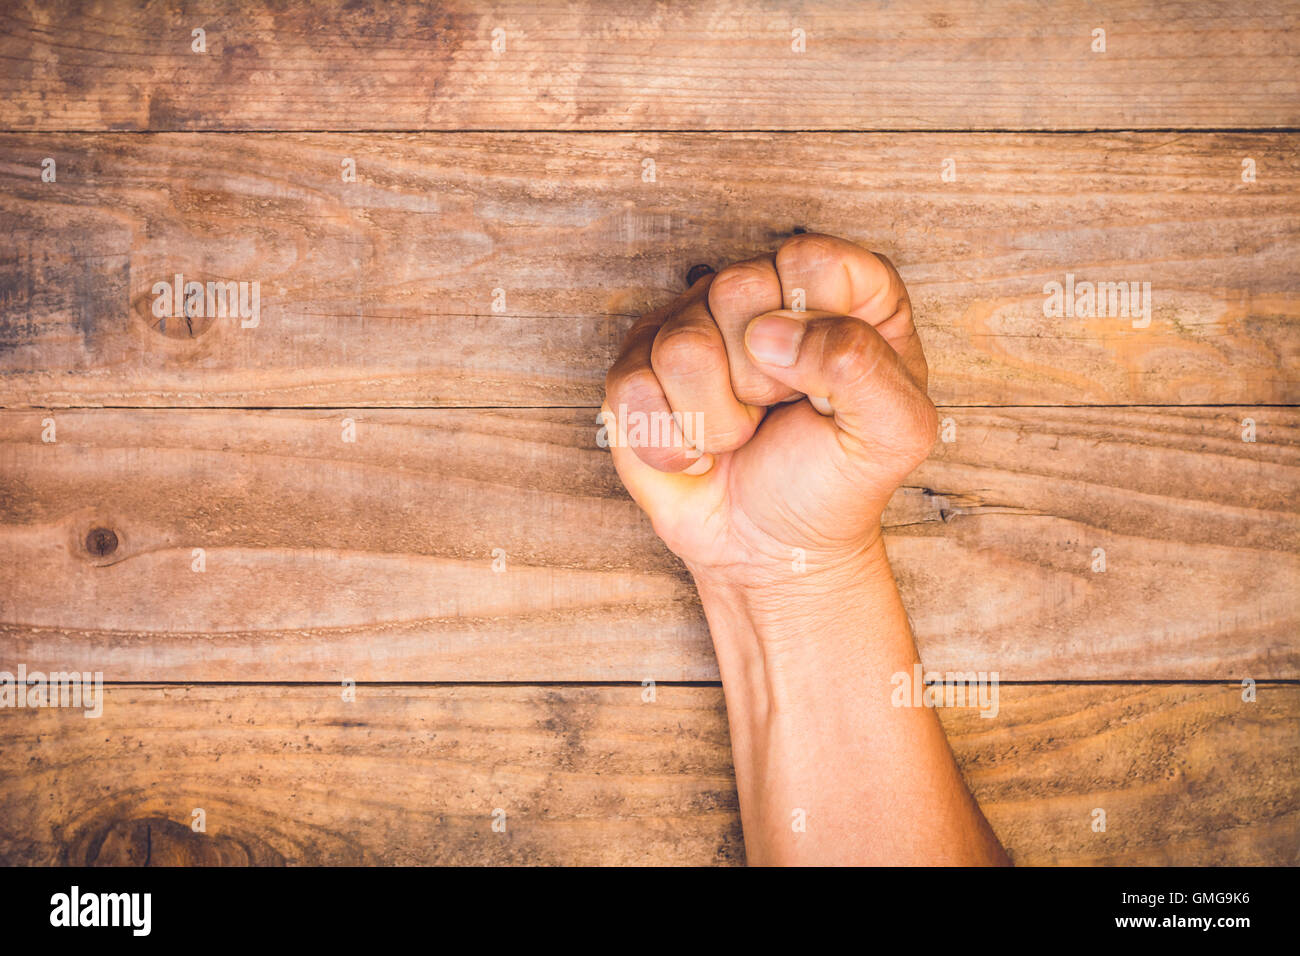 A man fists clenched on a wooden table in anger Stock Photo